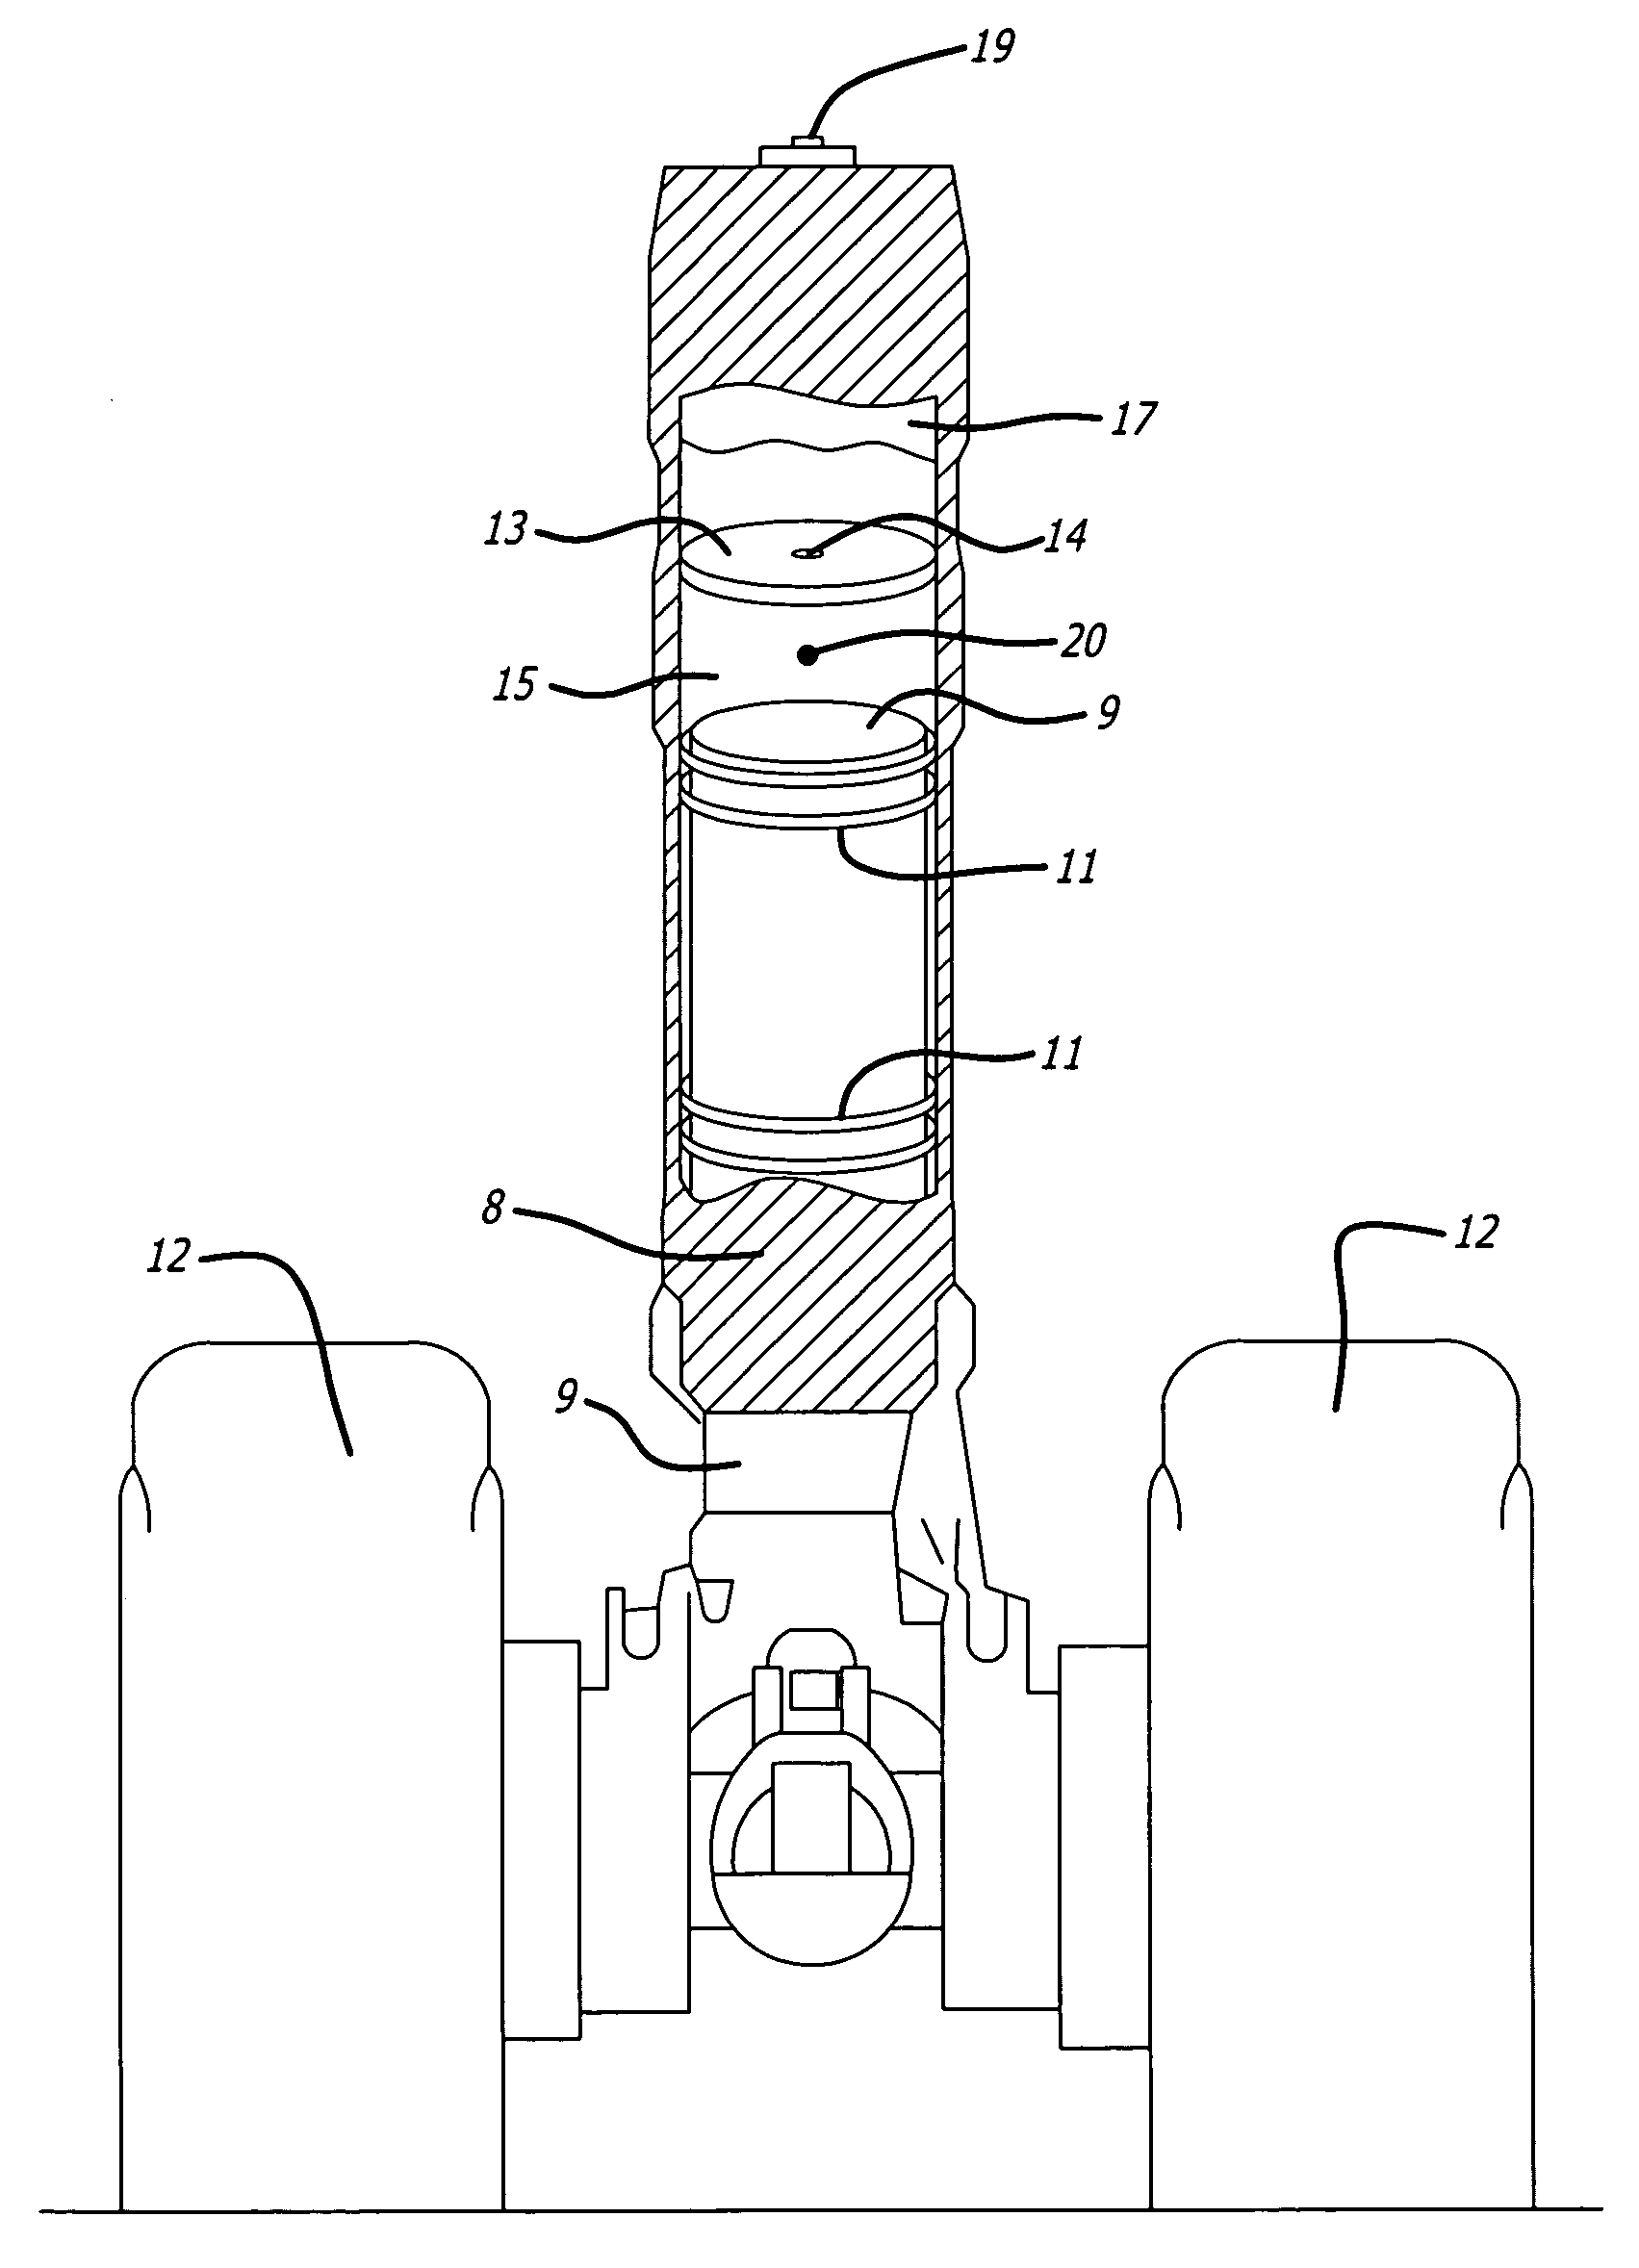 Rotating seal for anti-stiction of hydraulic struts